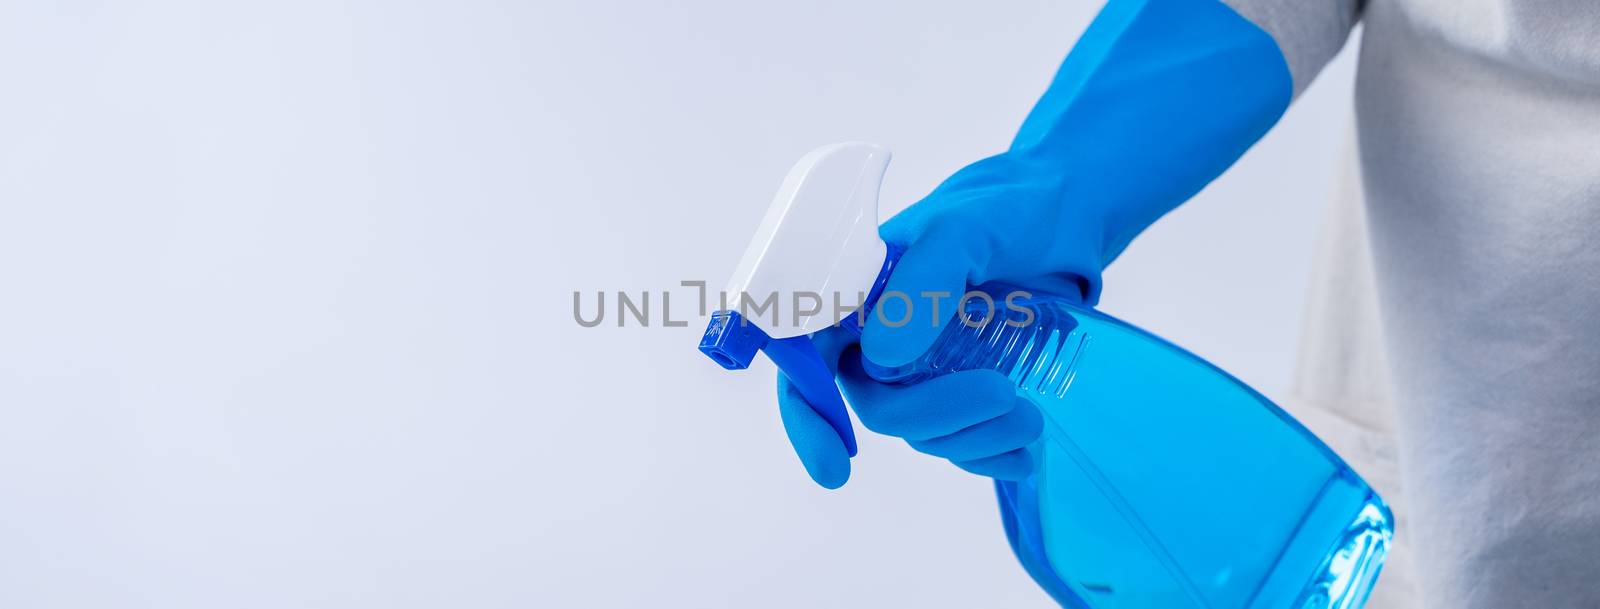 Young woman housekeeper in apron is cleaning, wiping down table surface with blue gloves, wet yellow rag, spraying bottle cleaner, closeup design concept.